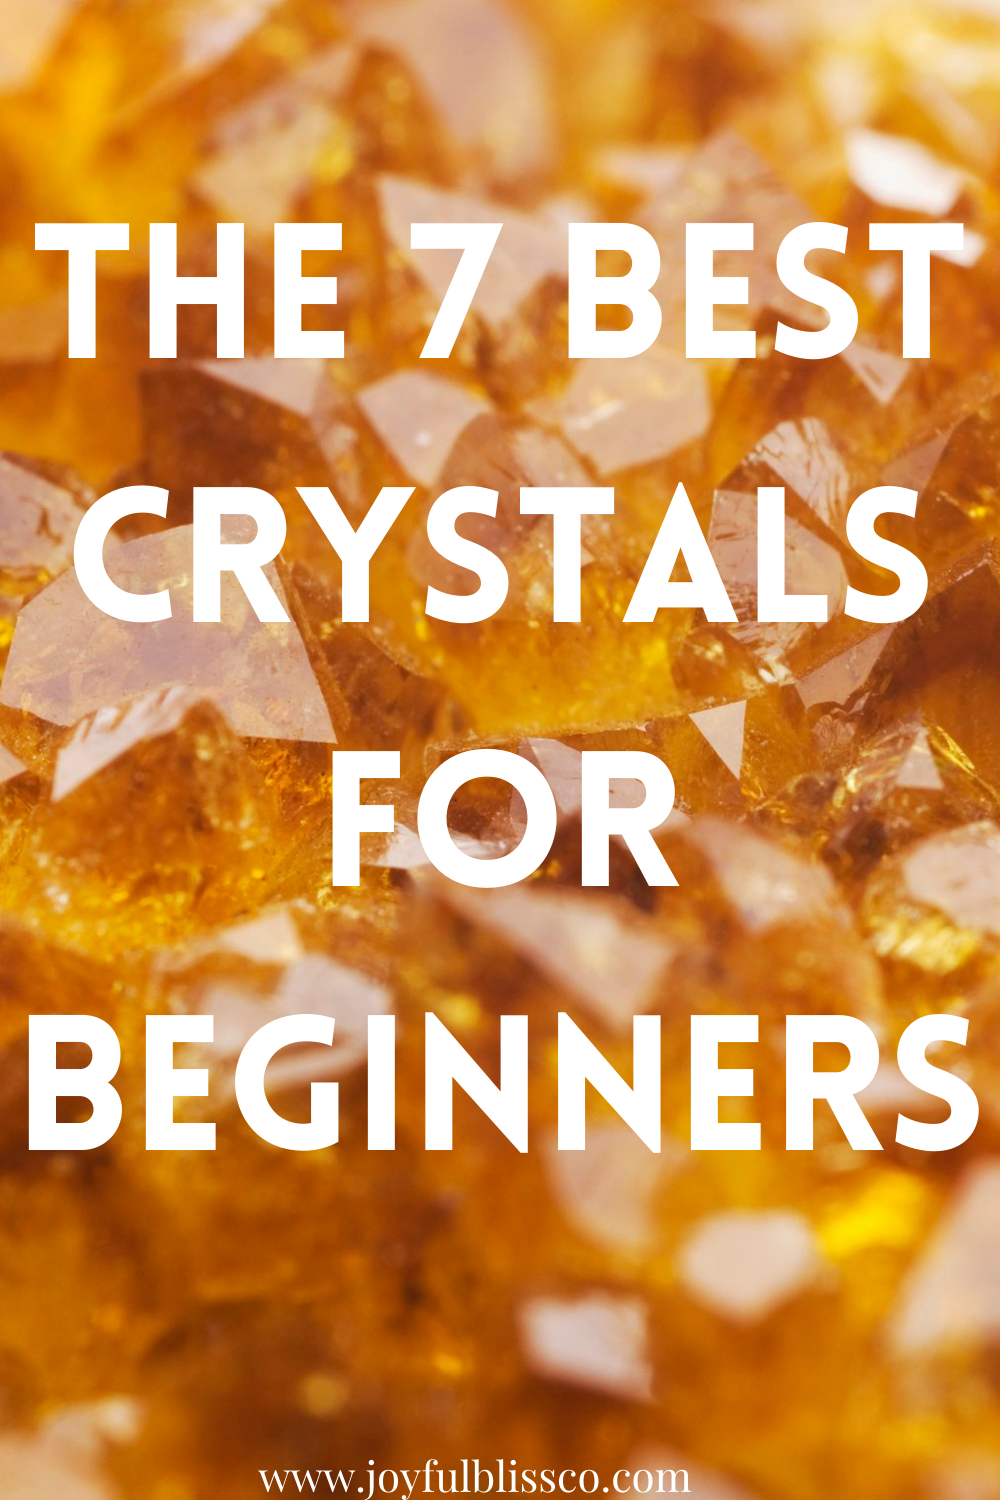 The 7 Best Crystals For Beginners